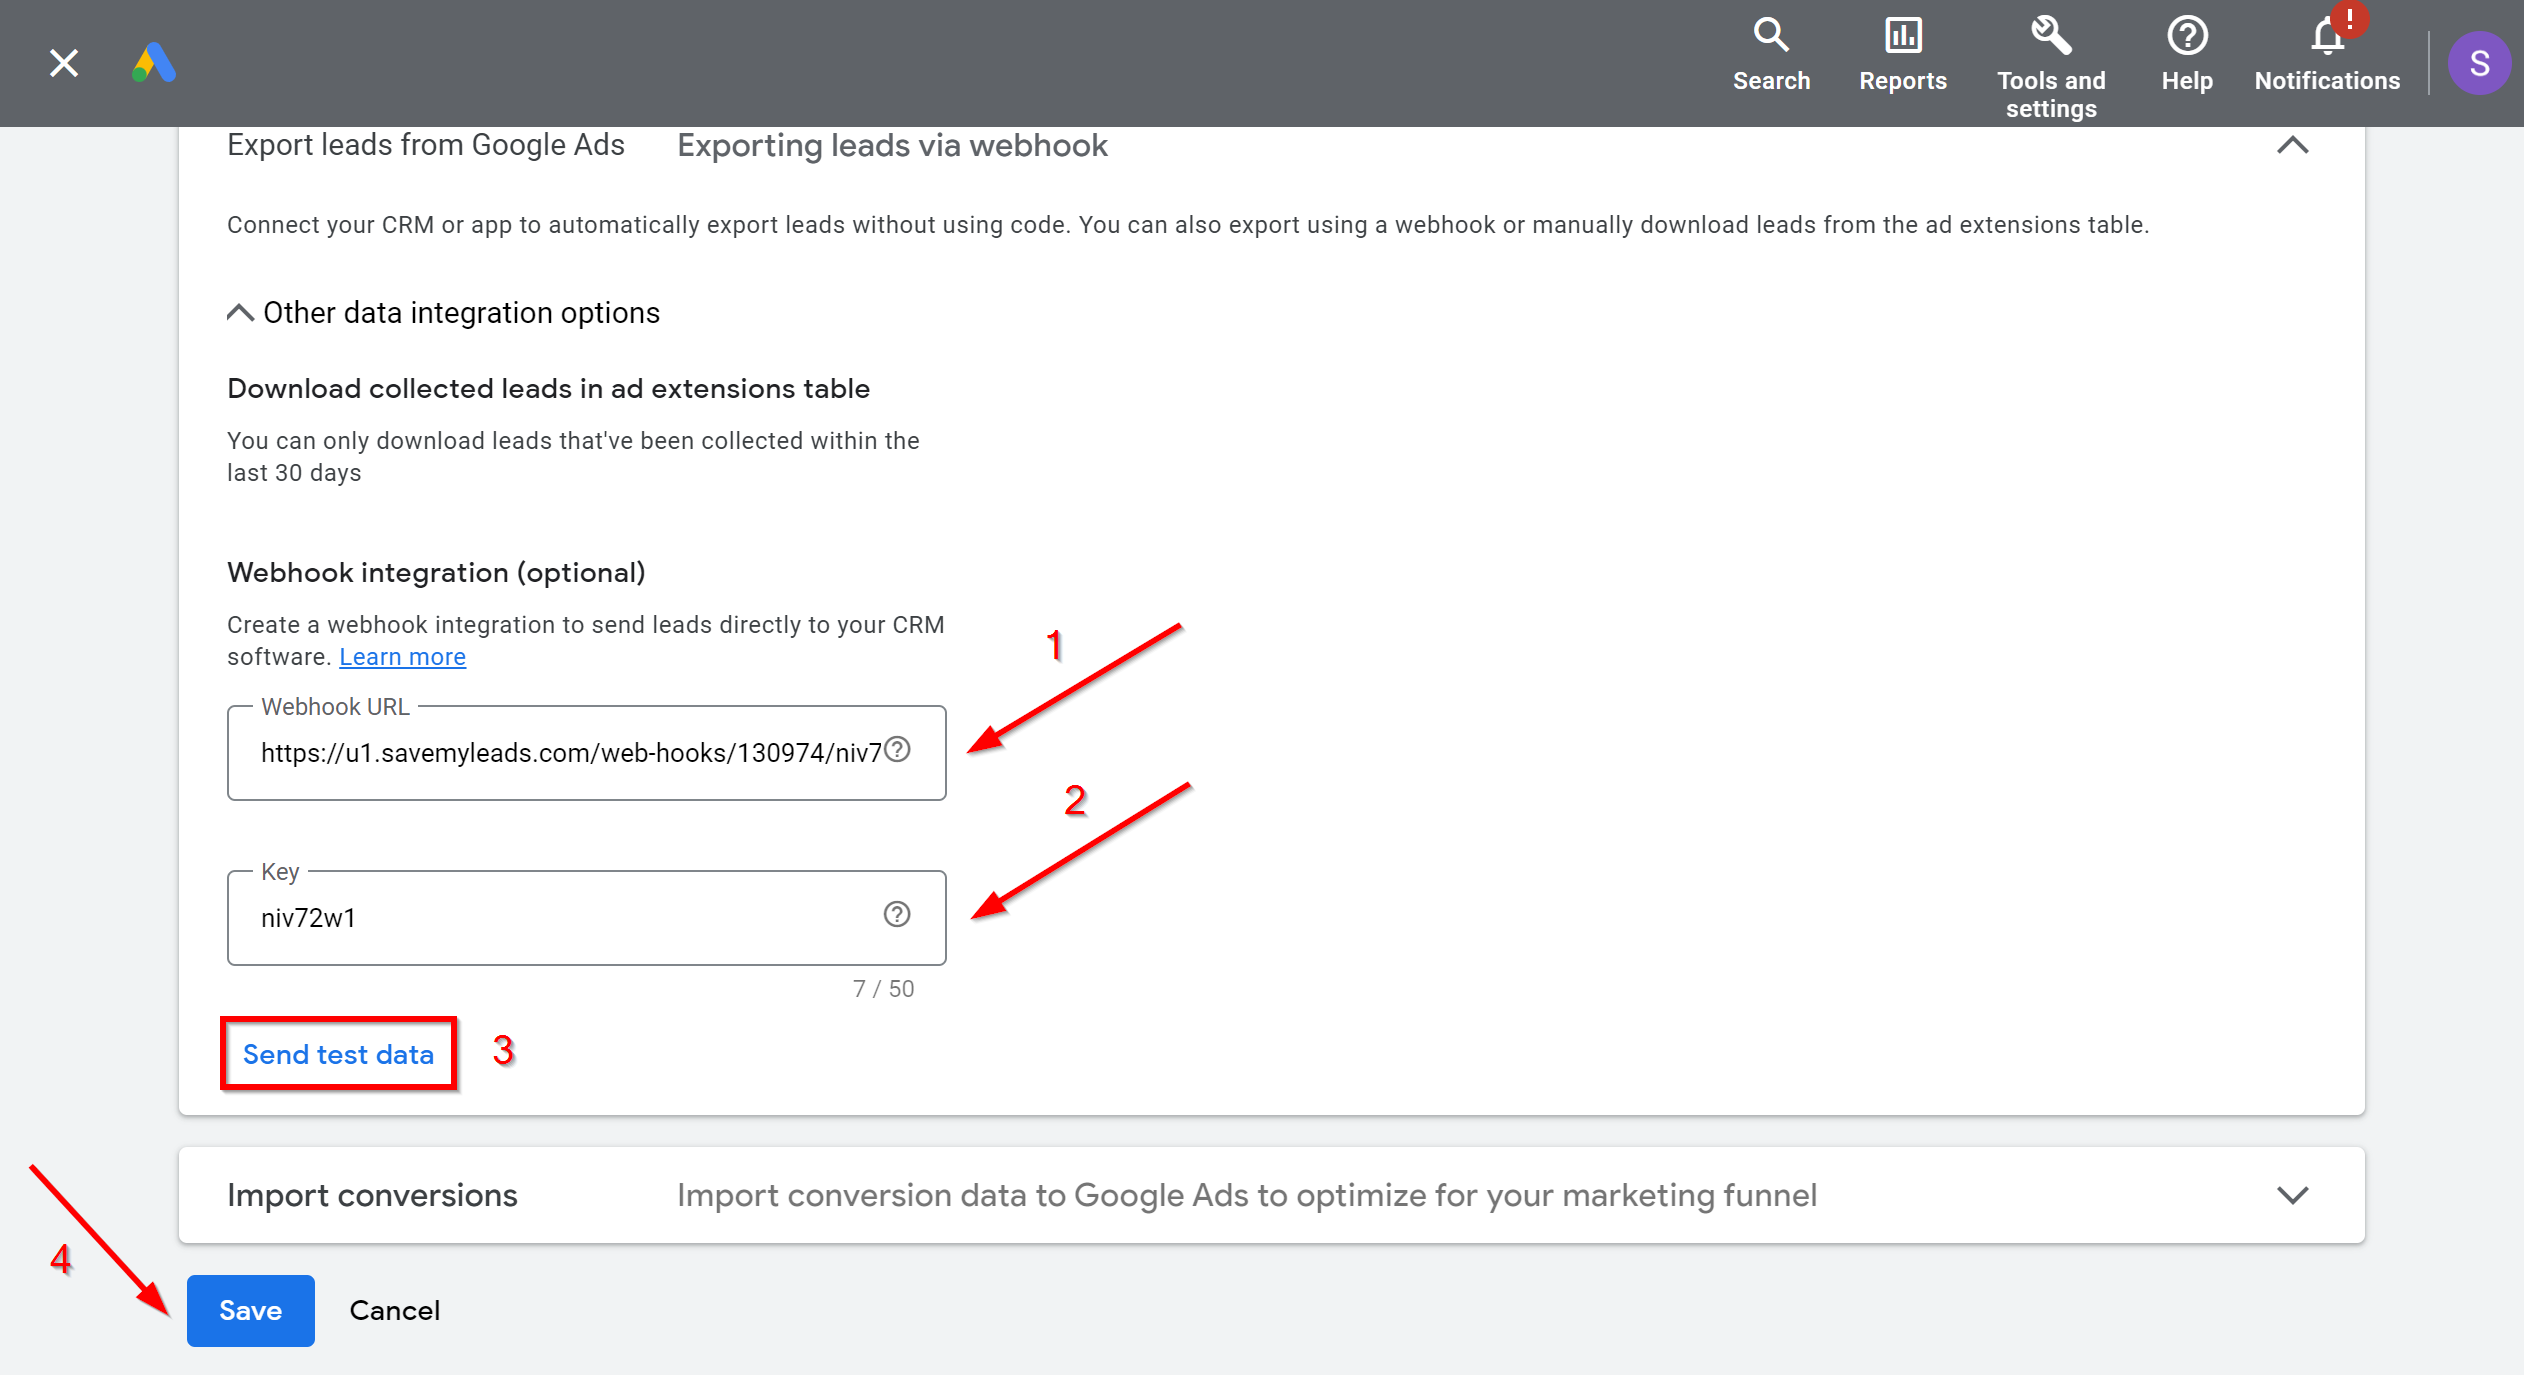 How to Connect Google Lead Form with BulkSMS | Data Source account connection